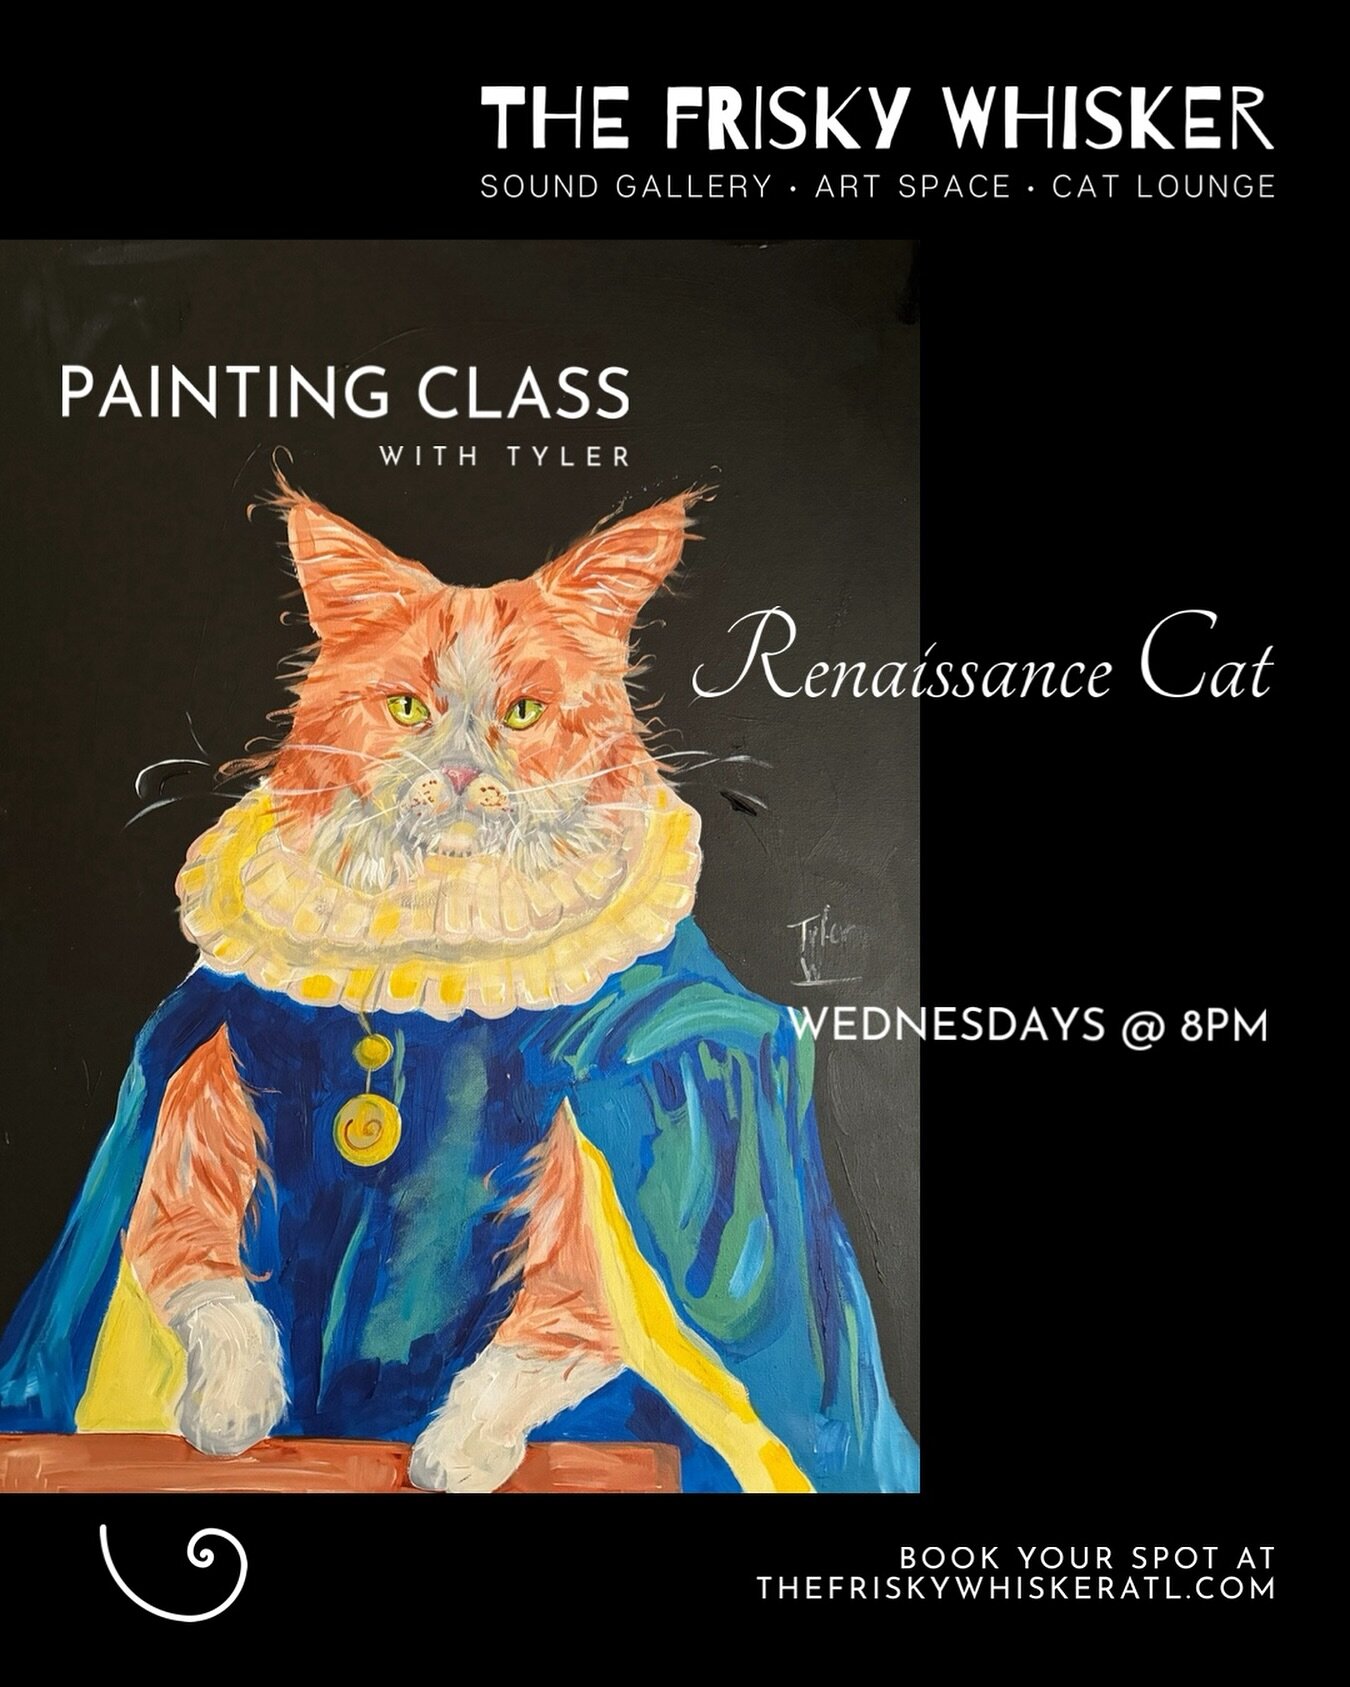 Our new design for our next 4 painting classes is here!

&ldquo;Renaissance Cat&rdquo;

Book your spots before they sell out 🖌️

Next 4 Wednesdays at 8pm

Class includes a drink and Whisker Lounge Entrance 😼

Booking link in our bio 🔗 

#paint #ar